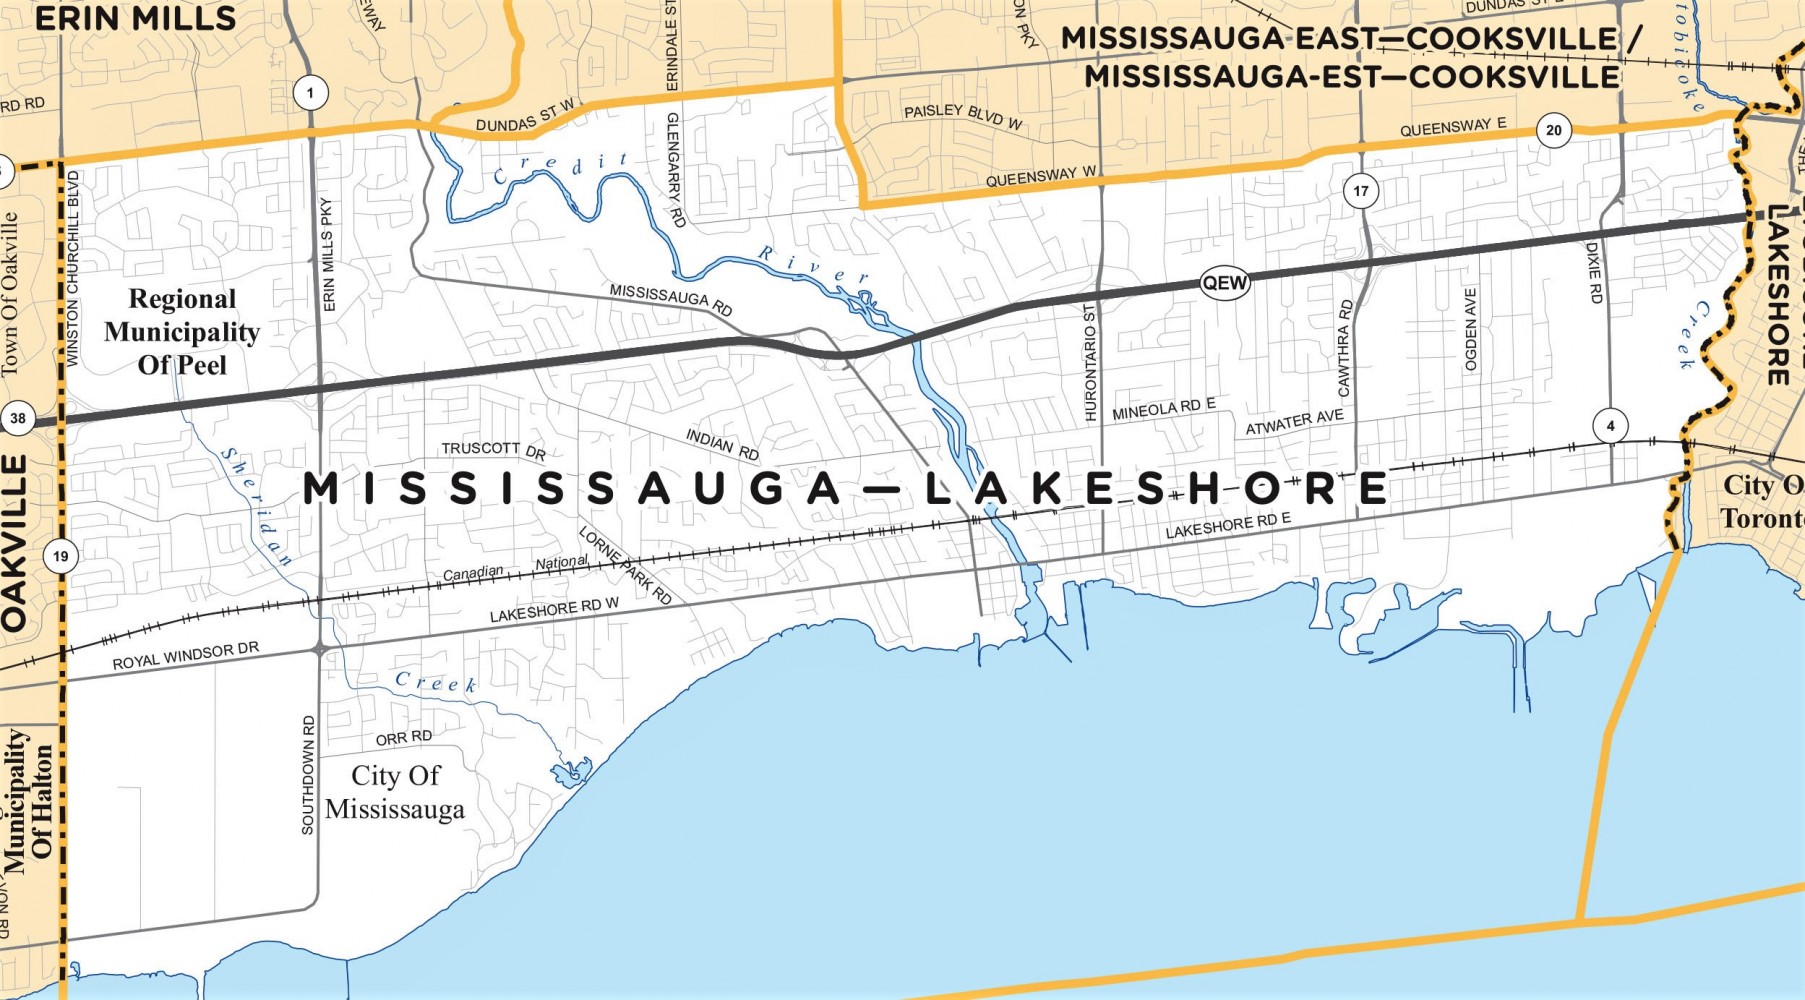 In one of the city’s oldest communities, which candidate will best manage Mississauga—Lakeshore’s population boom?